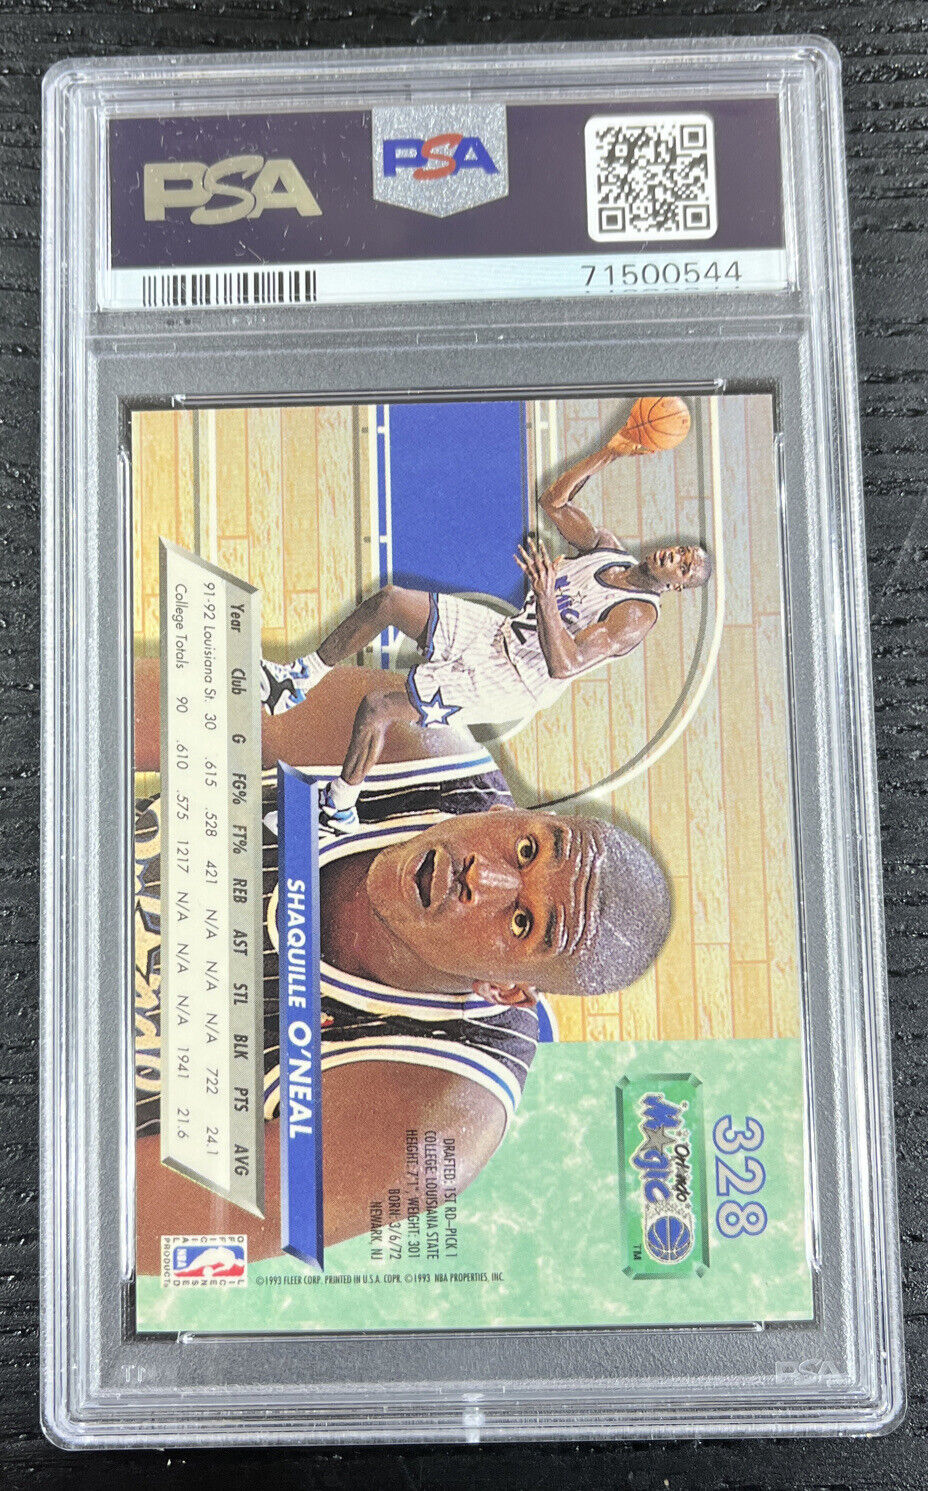 1992-93  Fleer Ultra Shaquille Oneal Rookie RC #328 Magic PSA 8